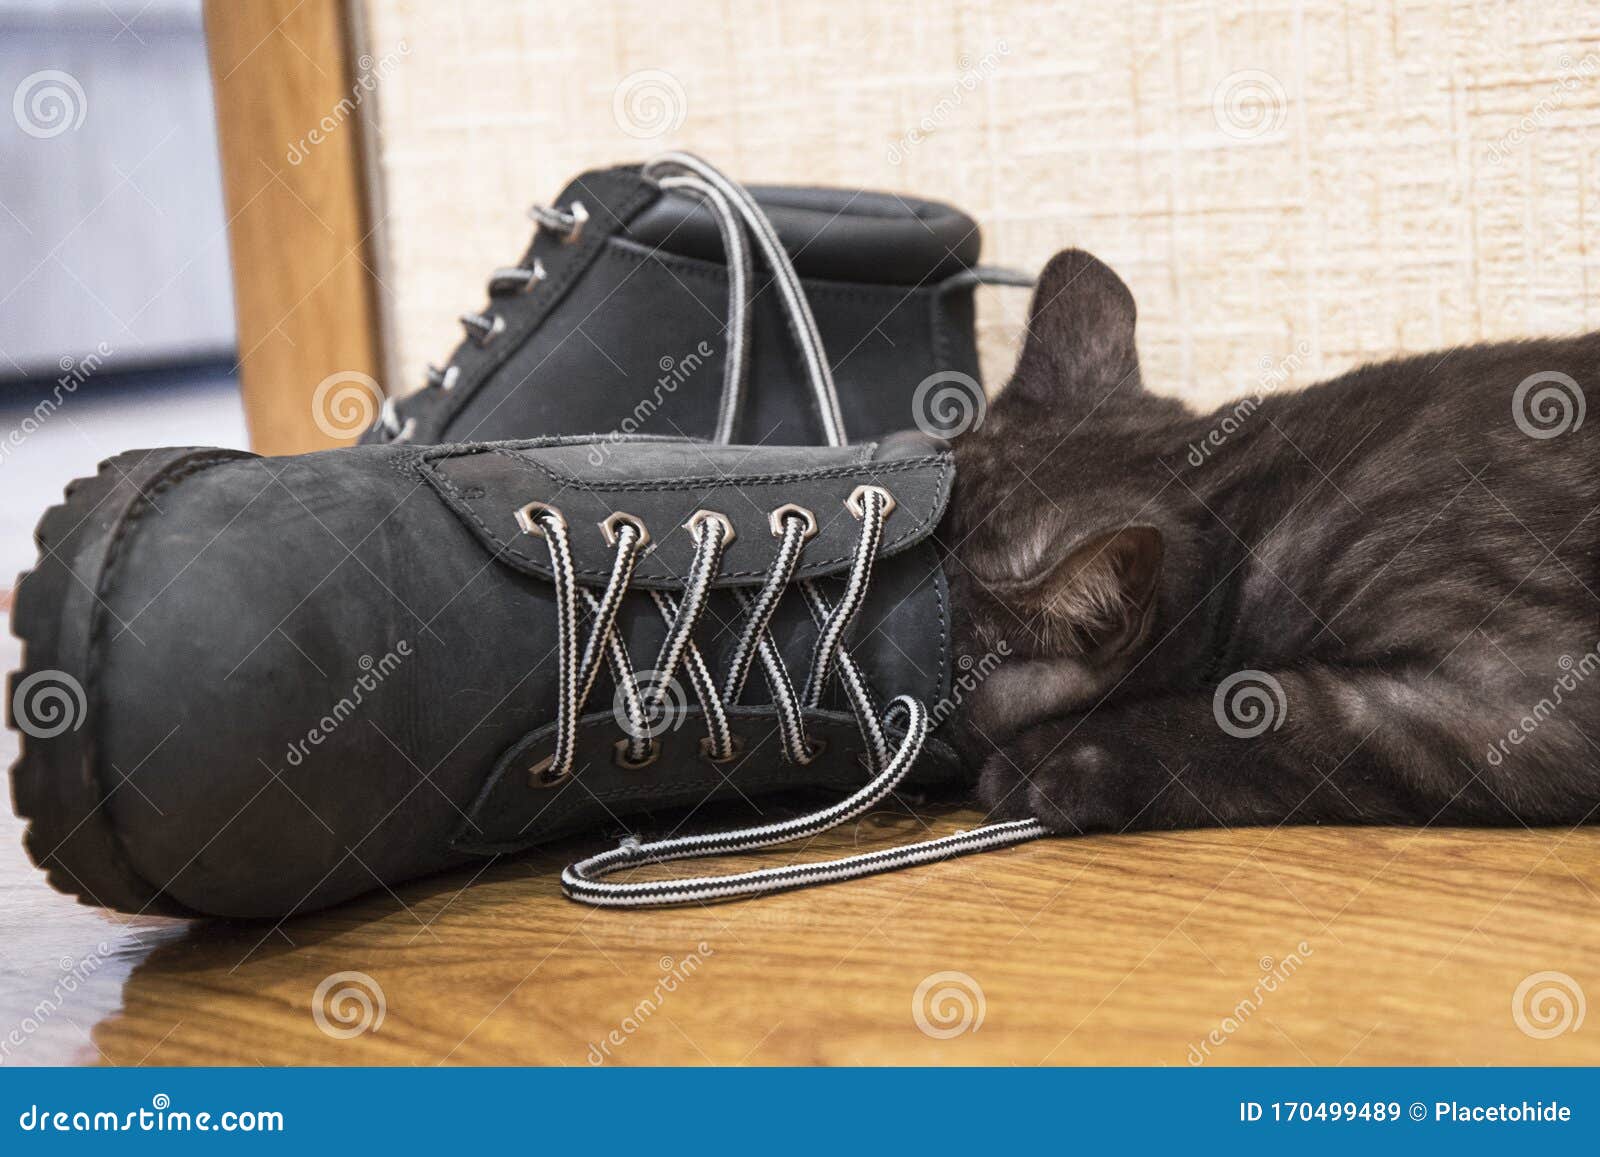 Playful Cat Put His Head into the Boot Stock Image - Image of animal ...